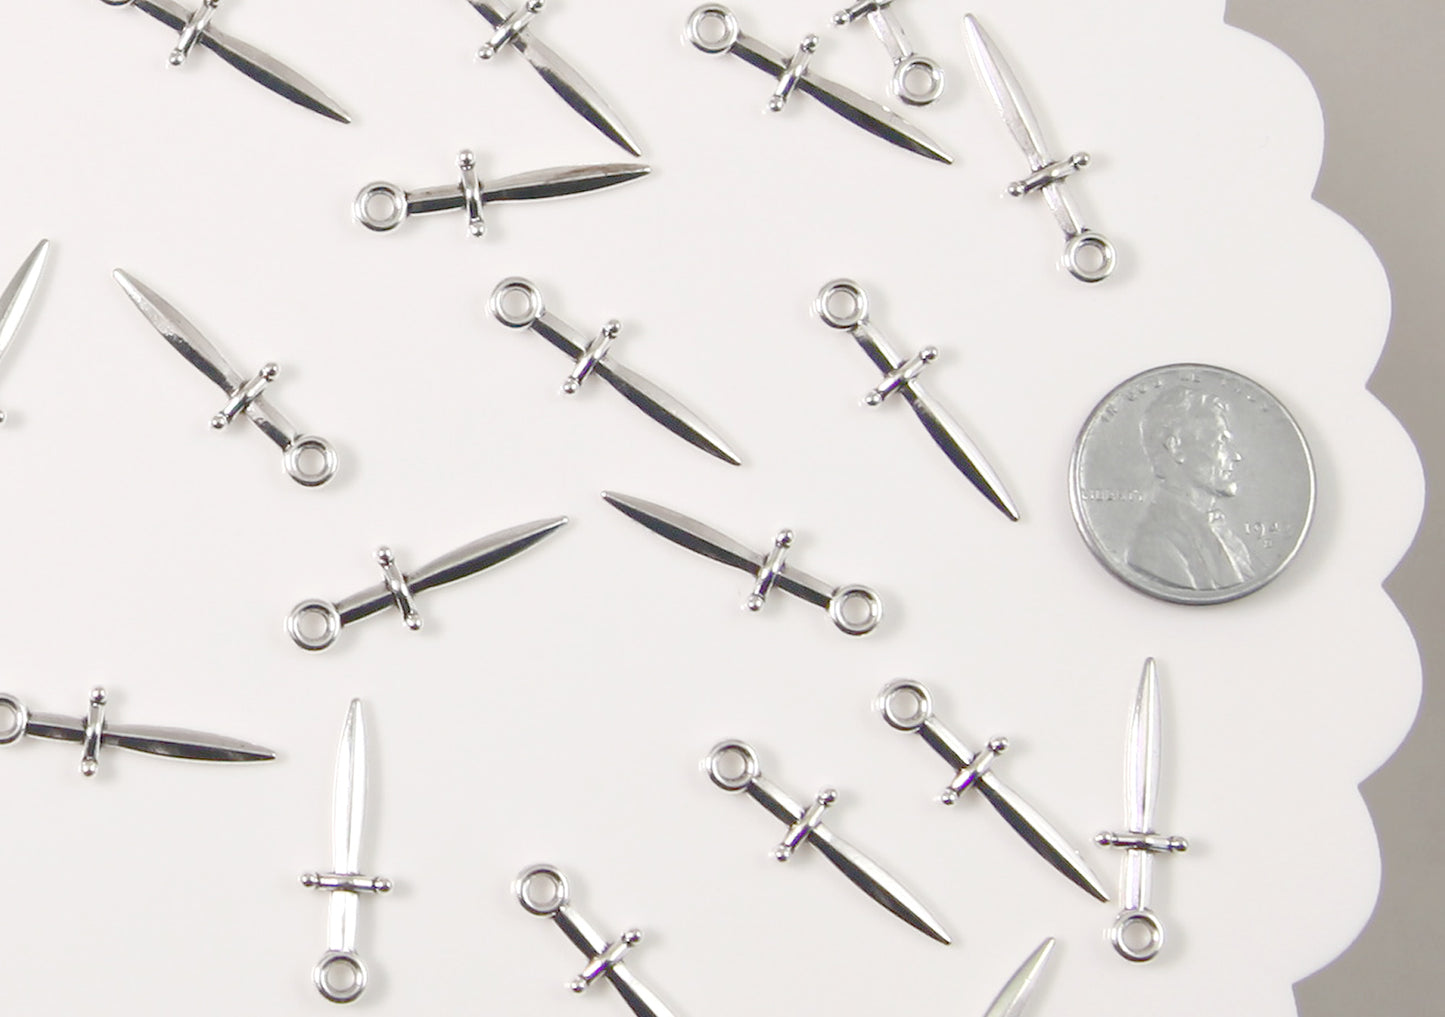 Tiny Sword Charms - 20 pc set - 23mm Metal Sword Dagger or Knife Charm - Easy to Make into Earrings